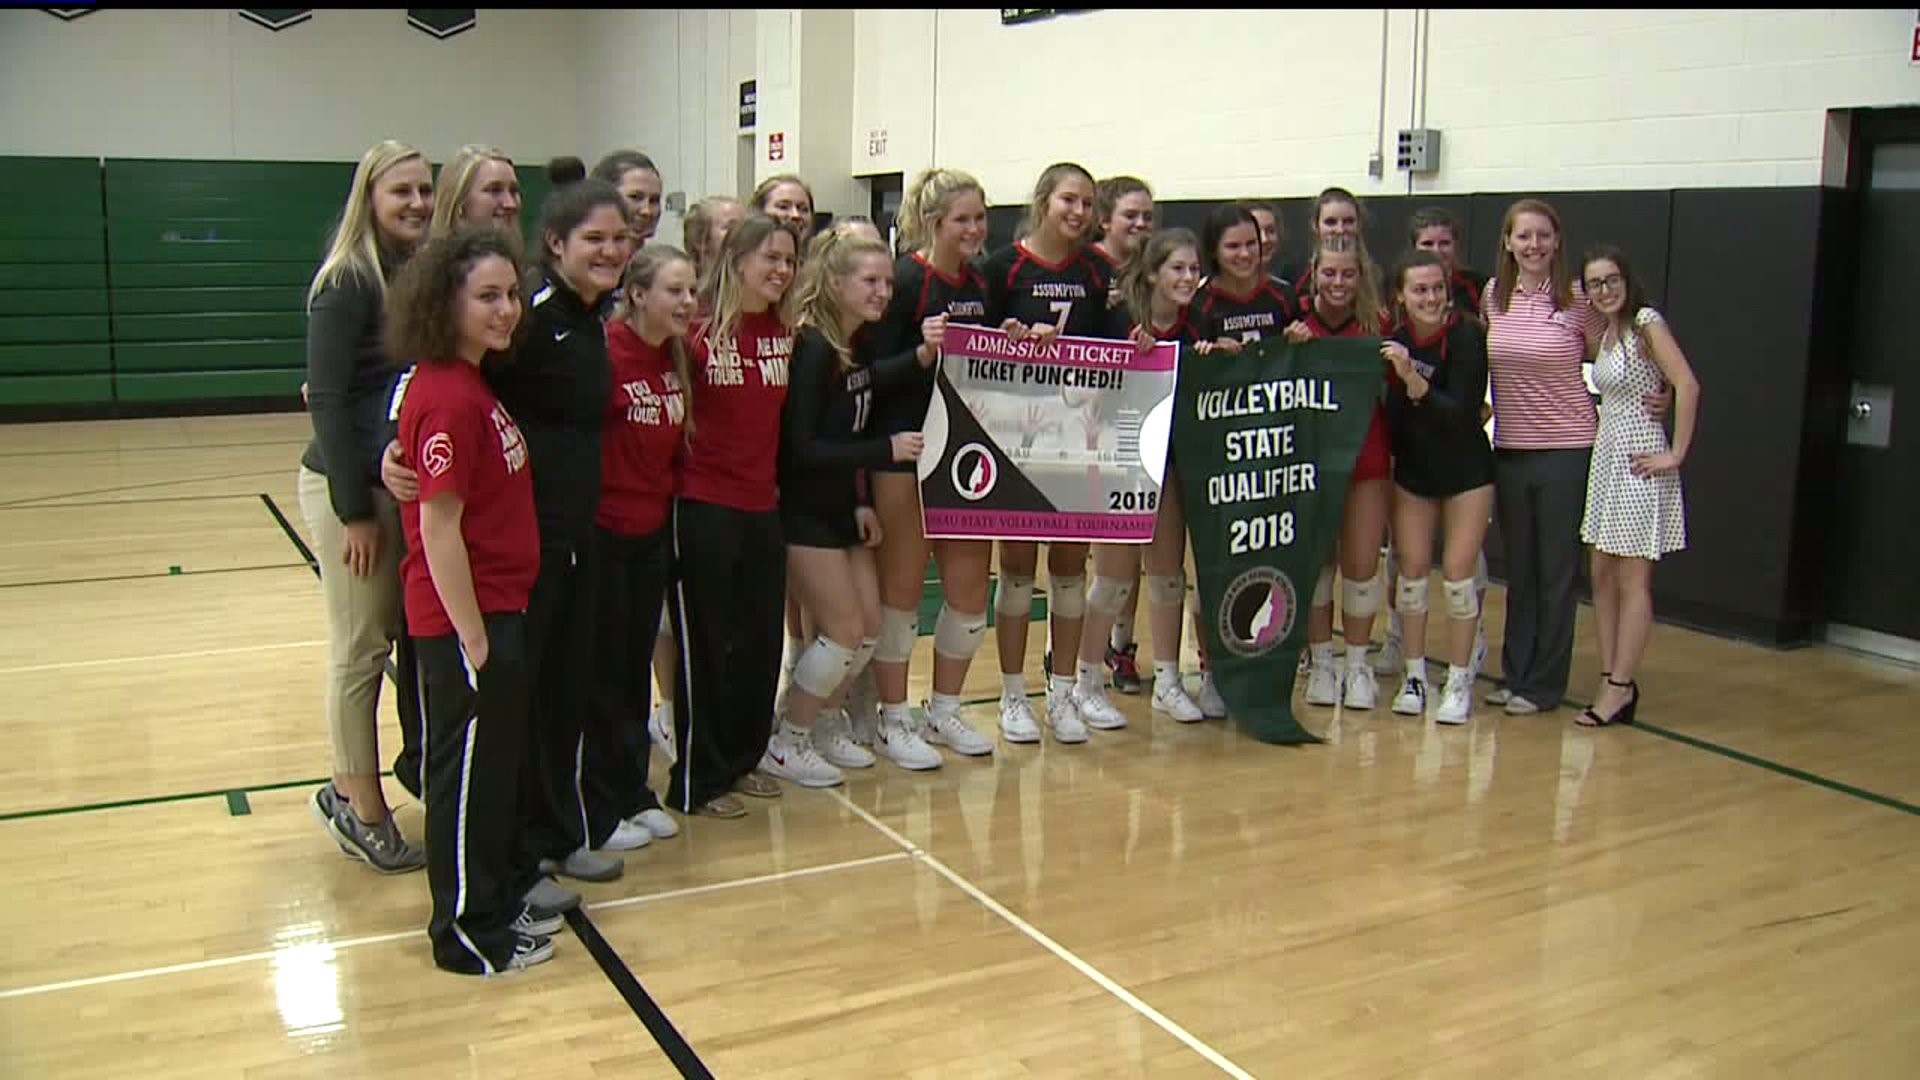 Assumption sweeps their way to State